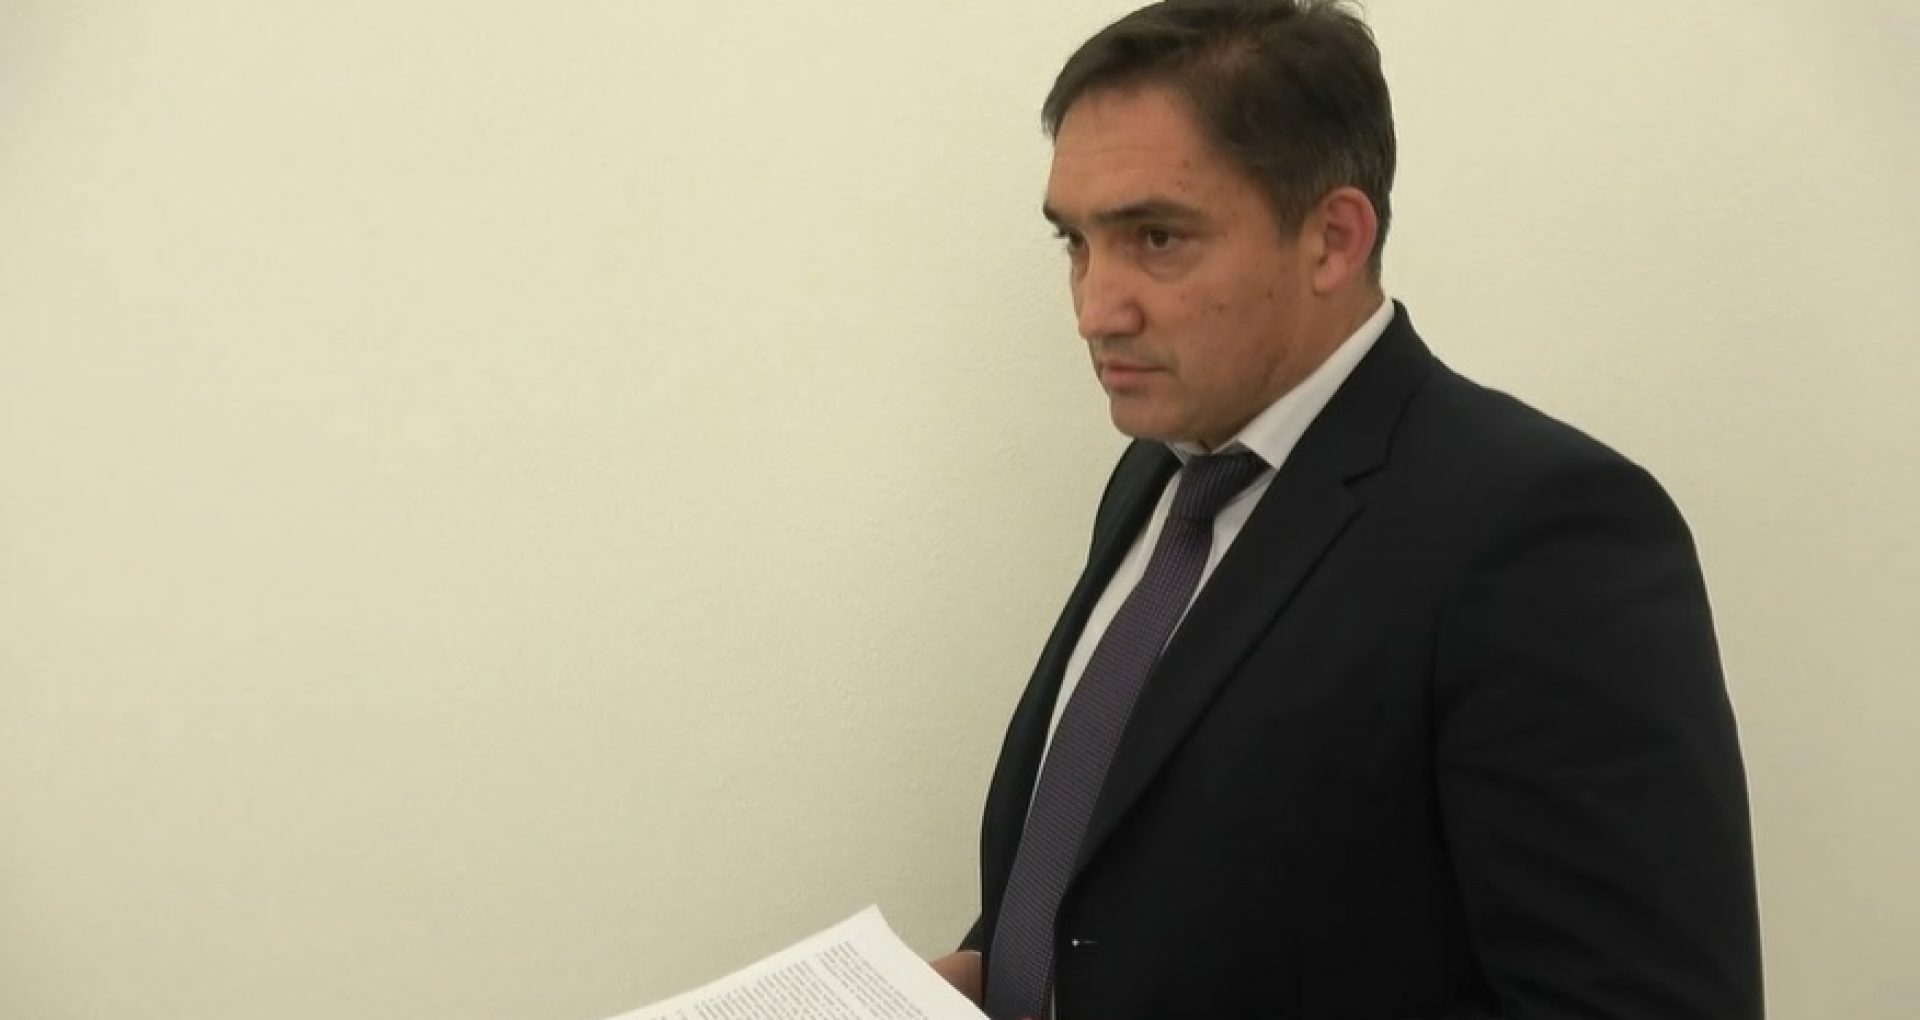 BREAKING NEWS: Prosecutor General was Suspended. He is Investigated by Anti-corruption Prosecutors